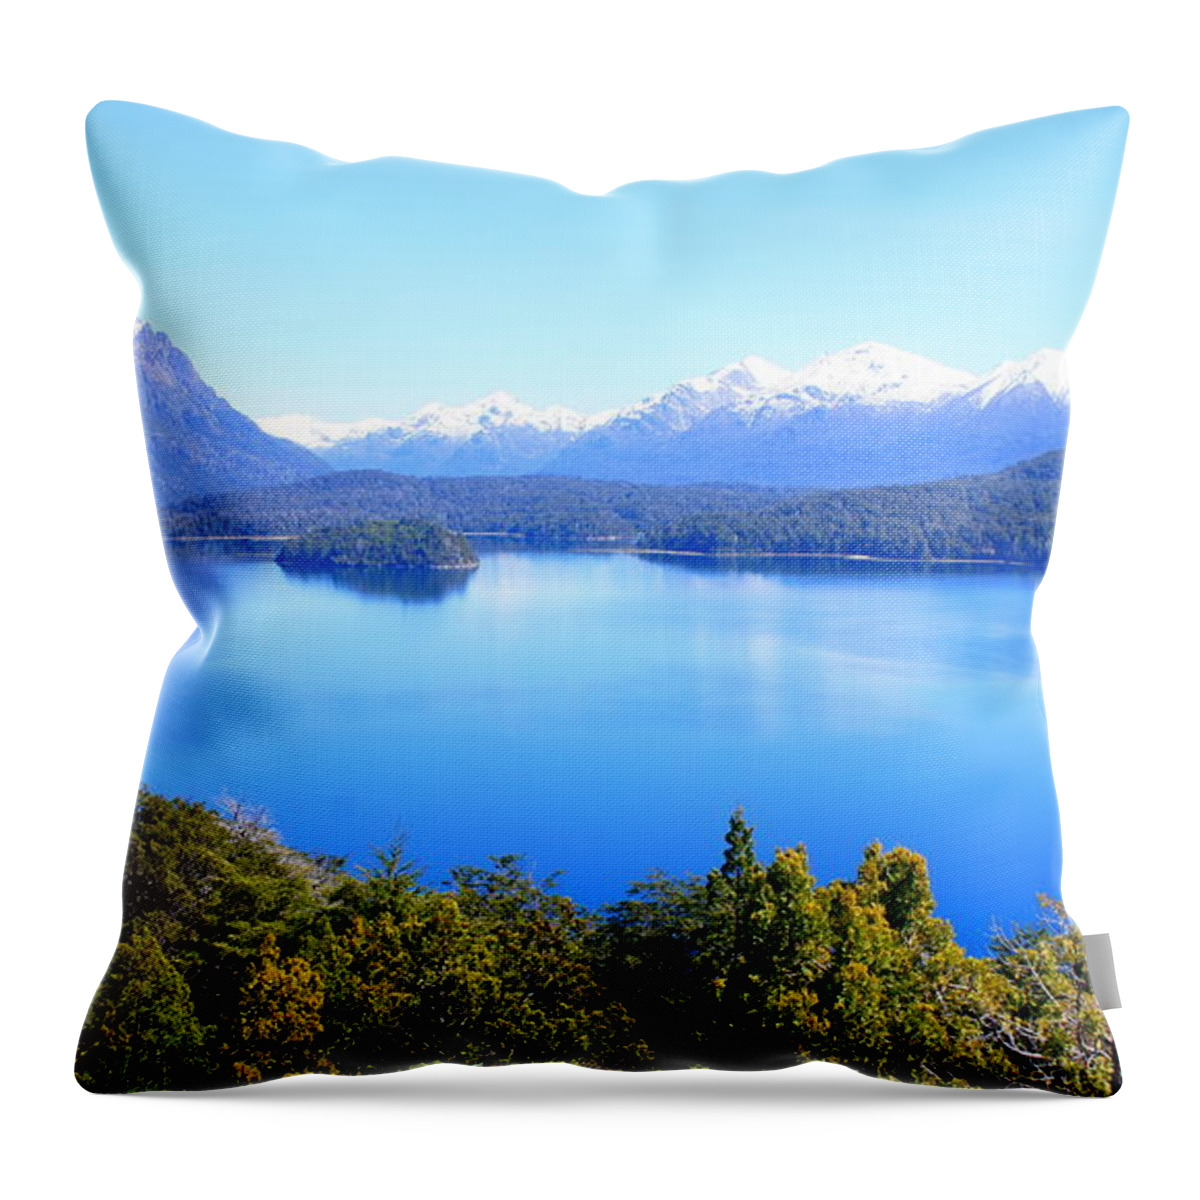 Tranquility Throw Pillow featuring the photograph Bariloche by Nido Huebl